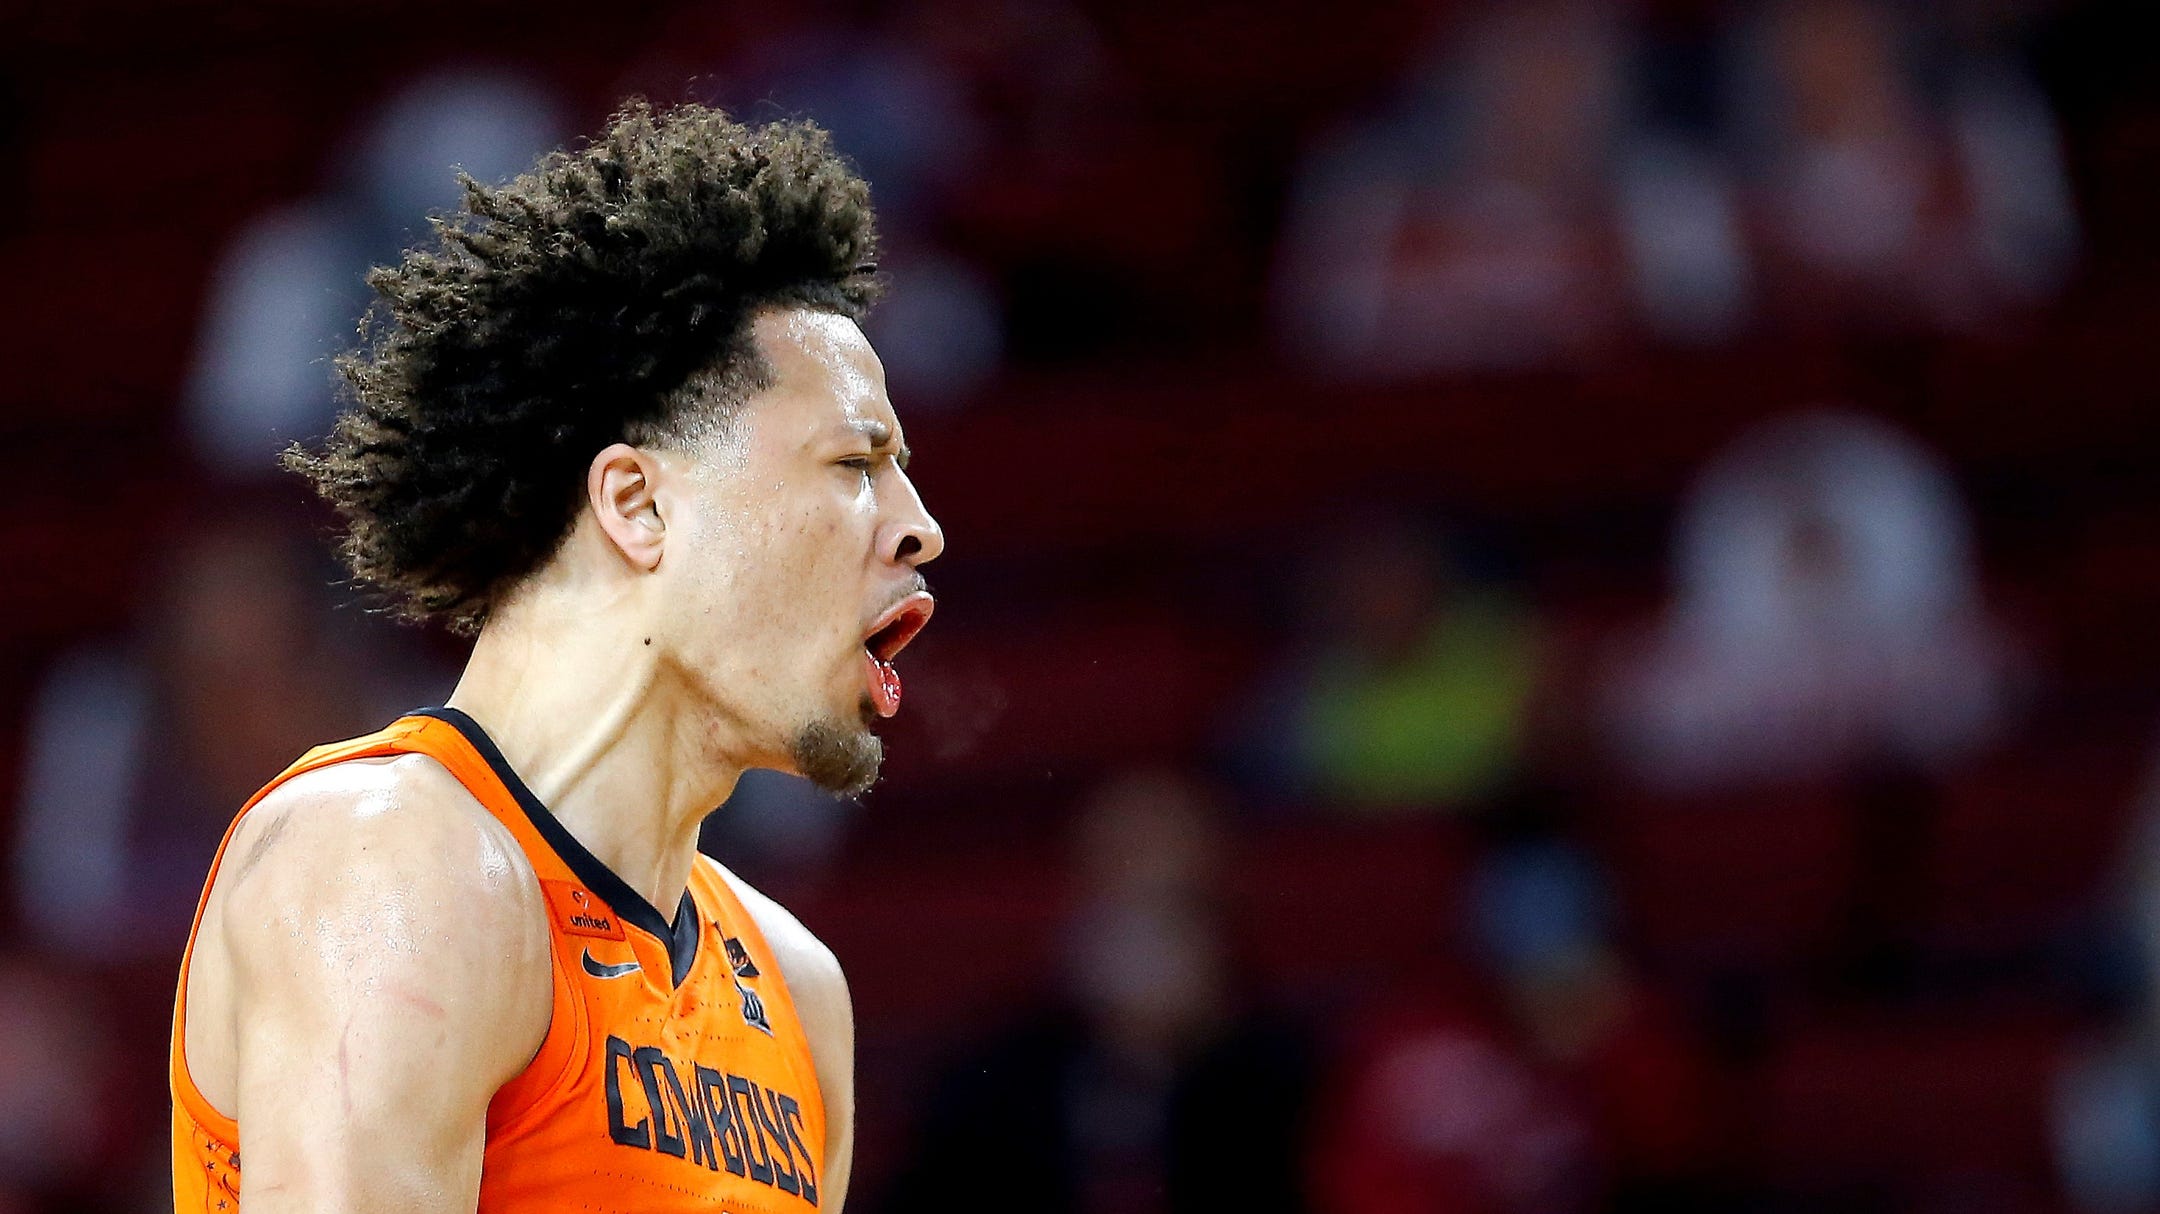 Nba Mock Draft Cade Cunningham Is Easily Top Choice In Loaded Class